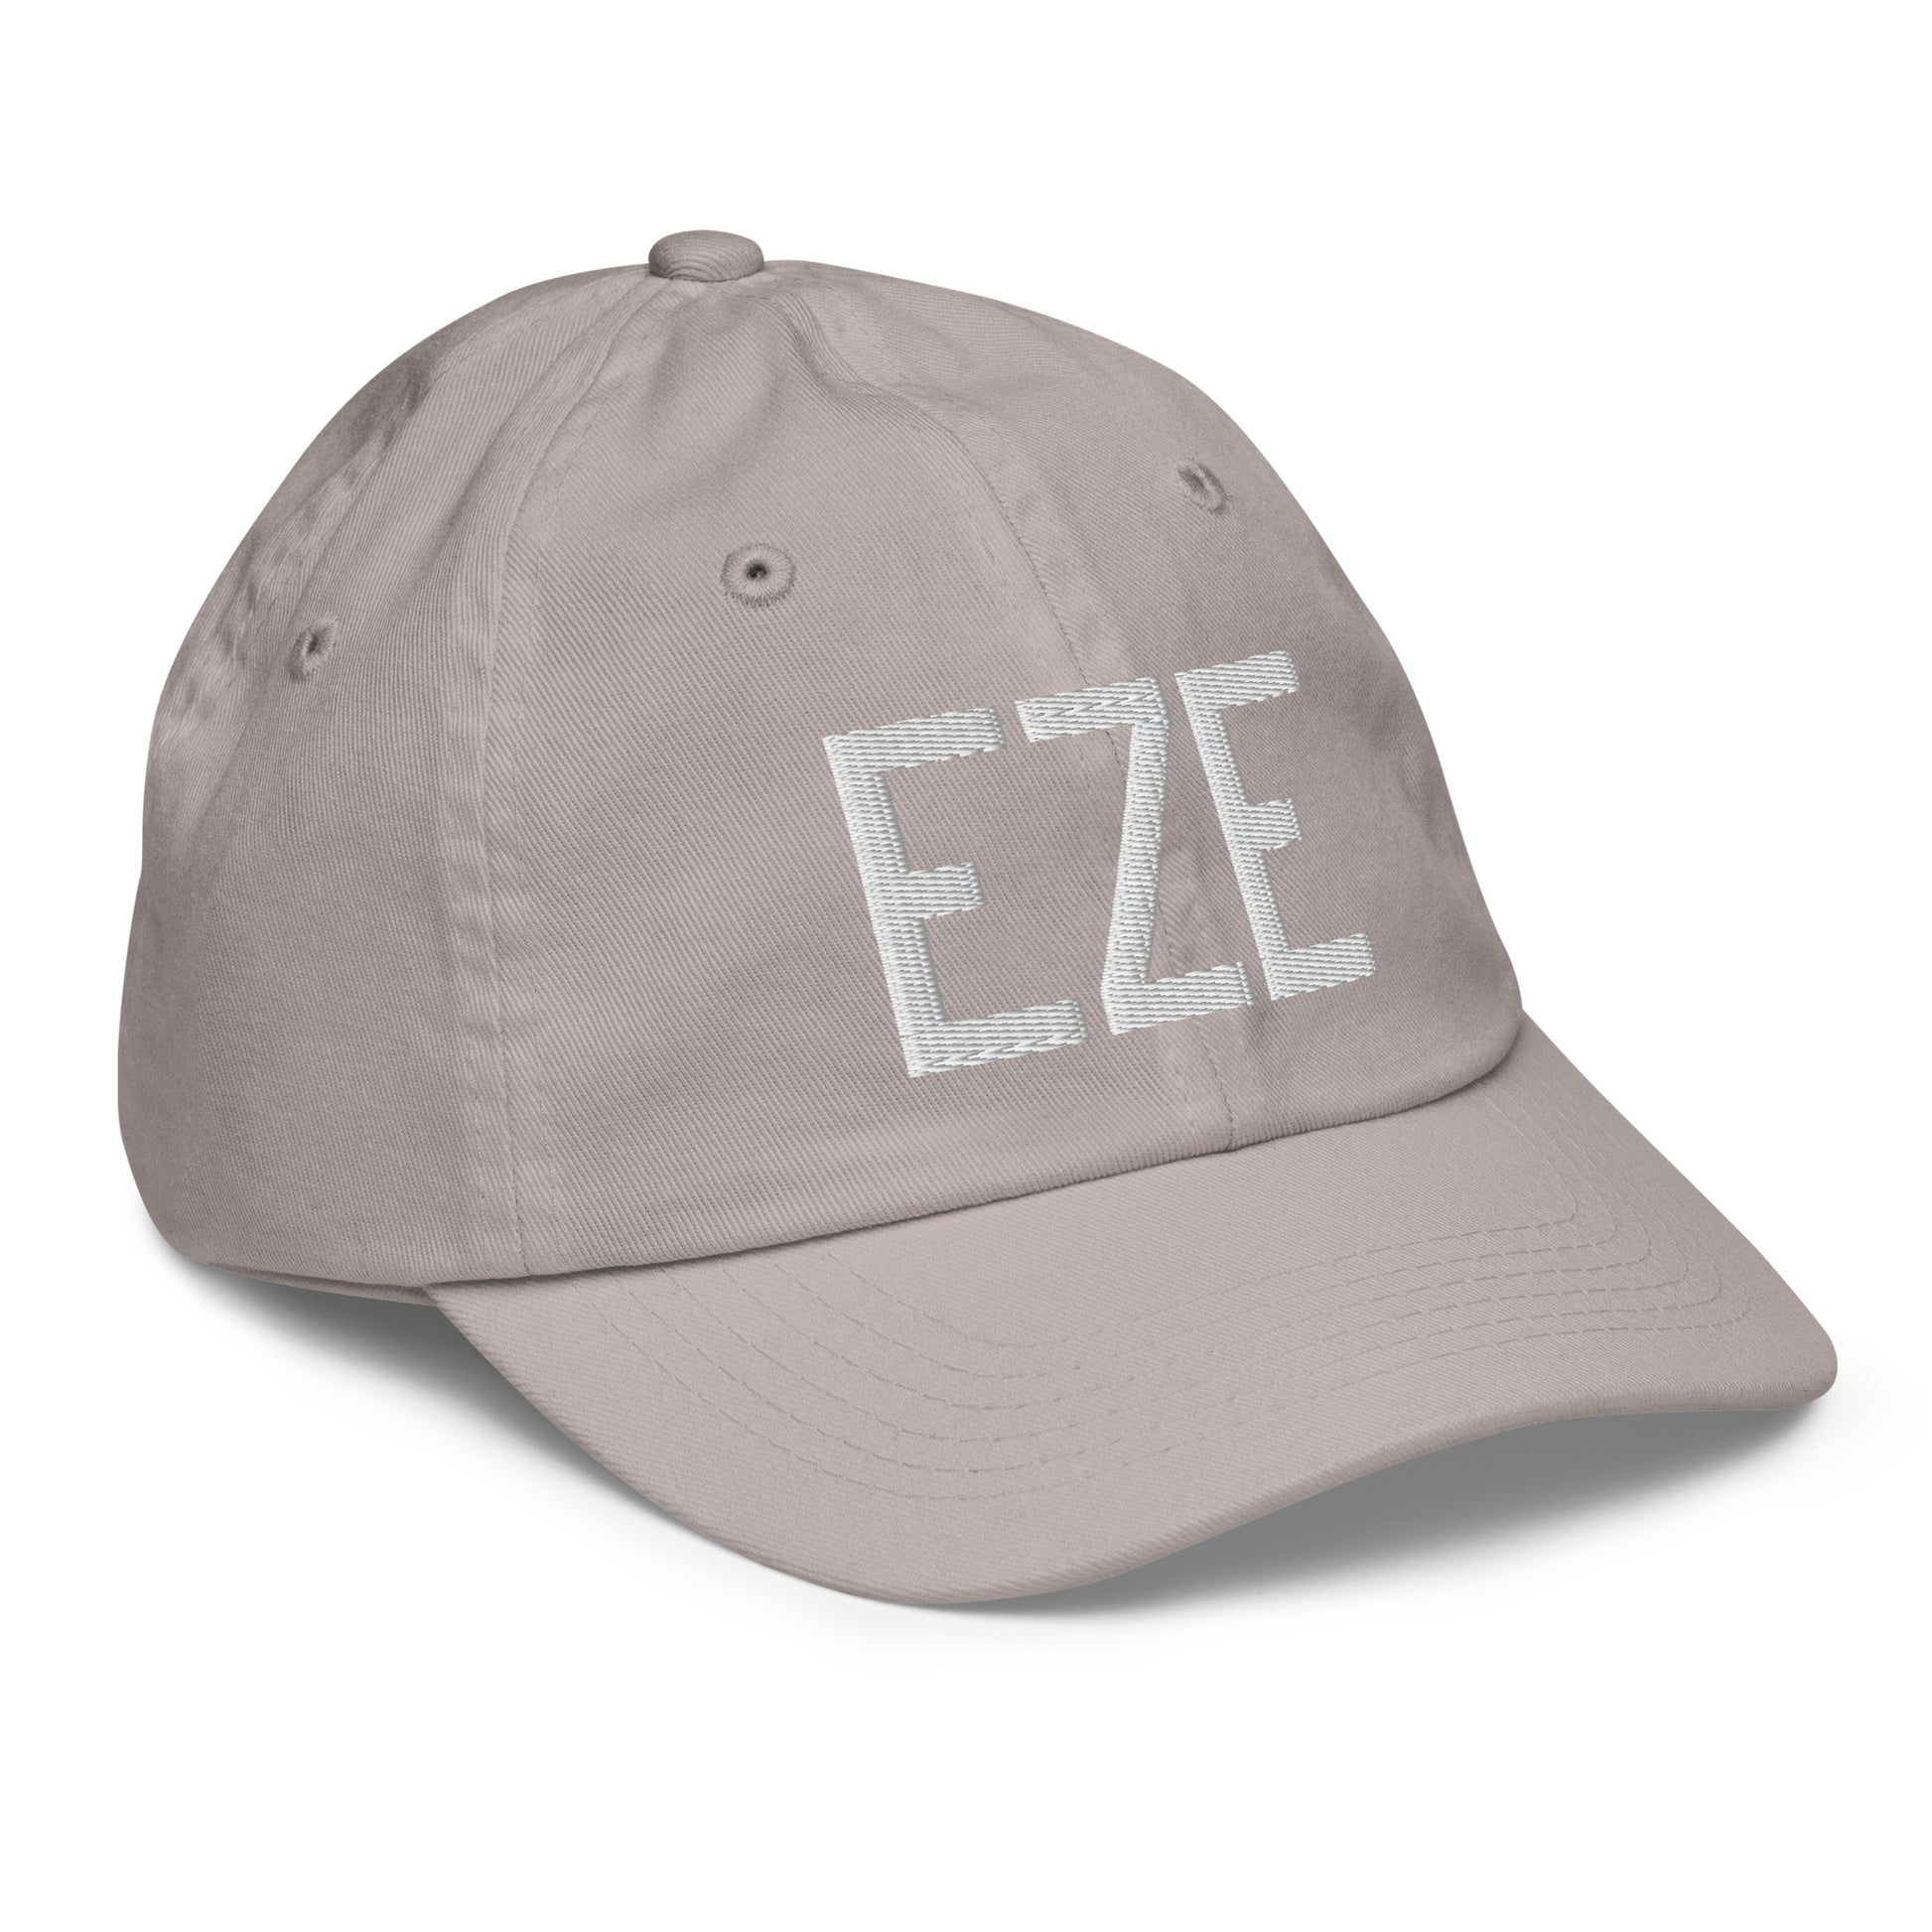 Airport Code Kid's Baseball Cap - White • EZE Buenos Aires • YHM Designs - Image 26